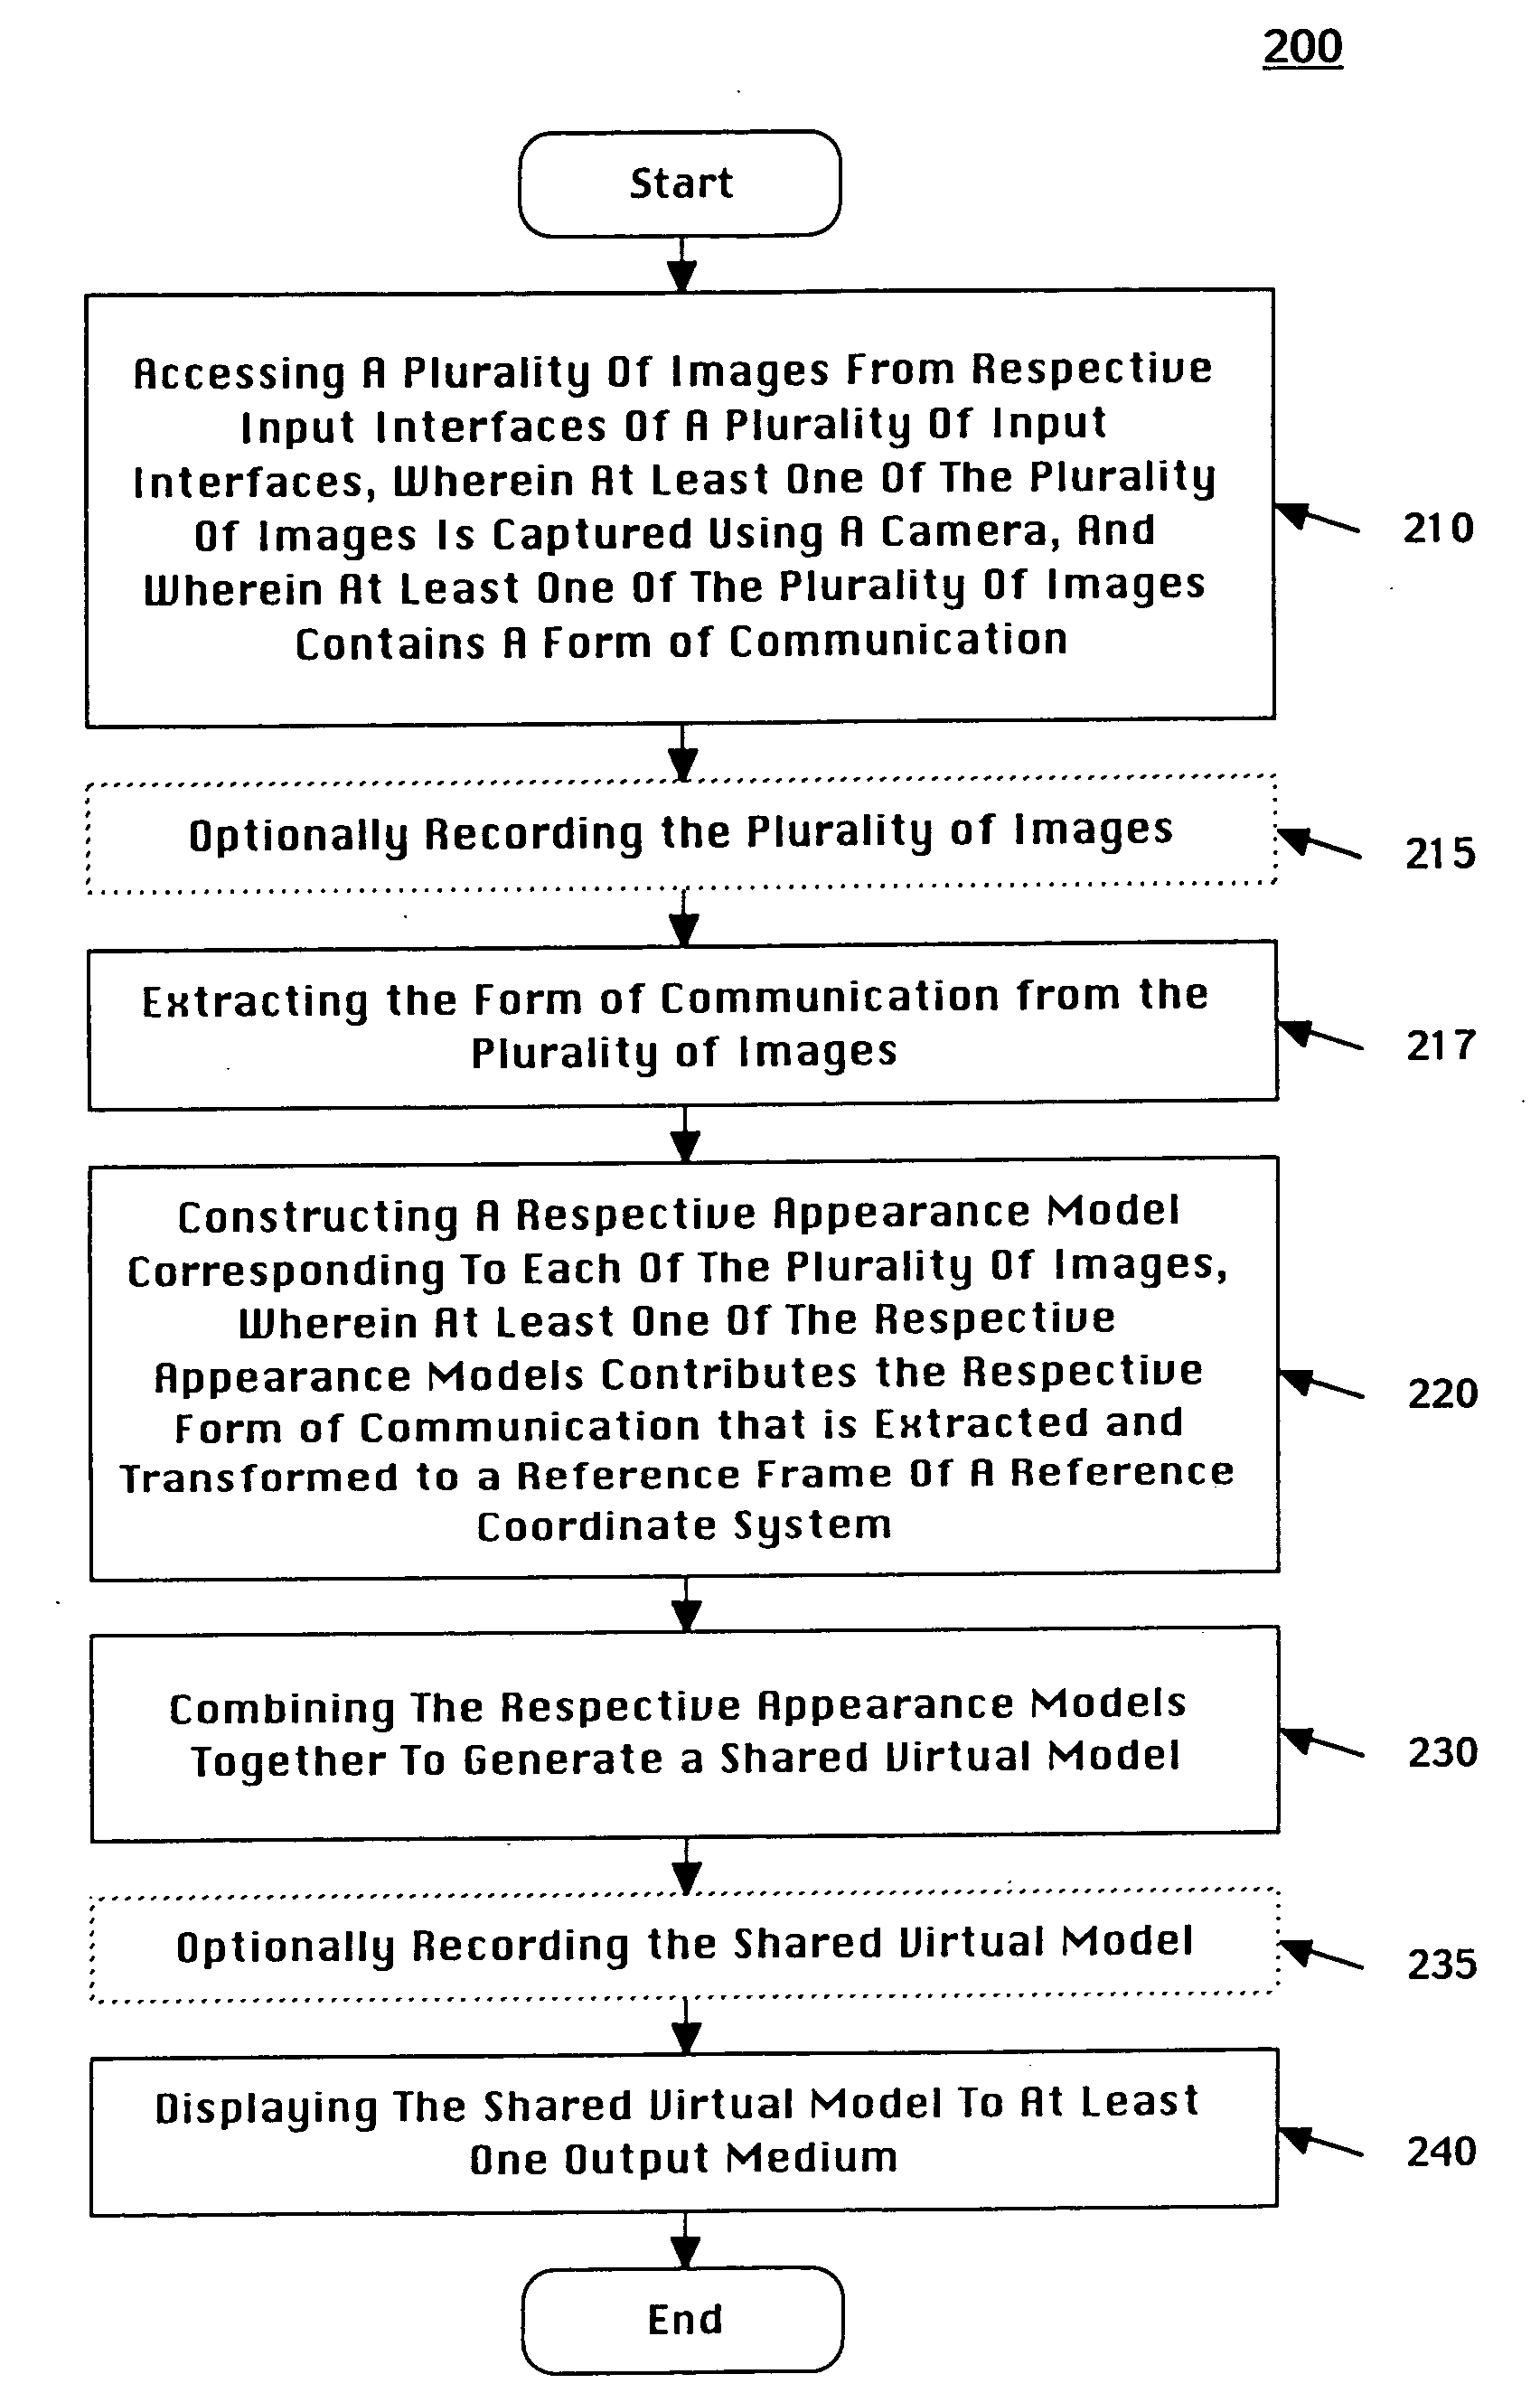 Method and system for communicating through shared media